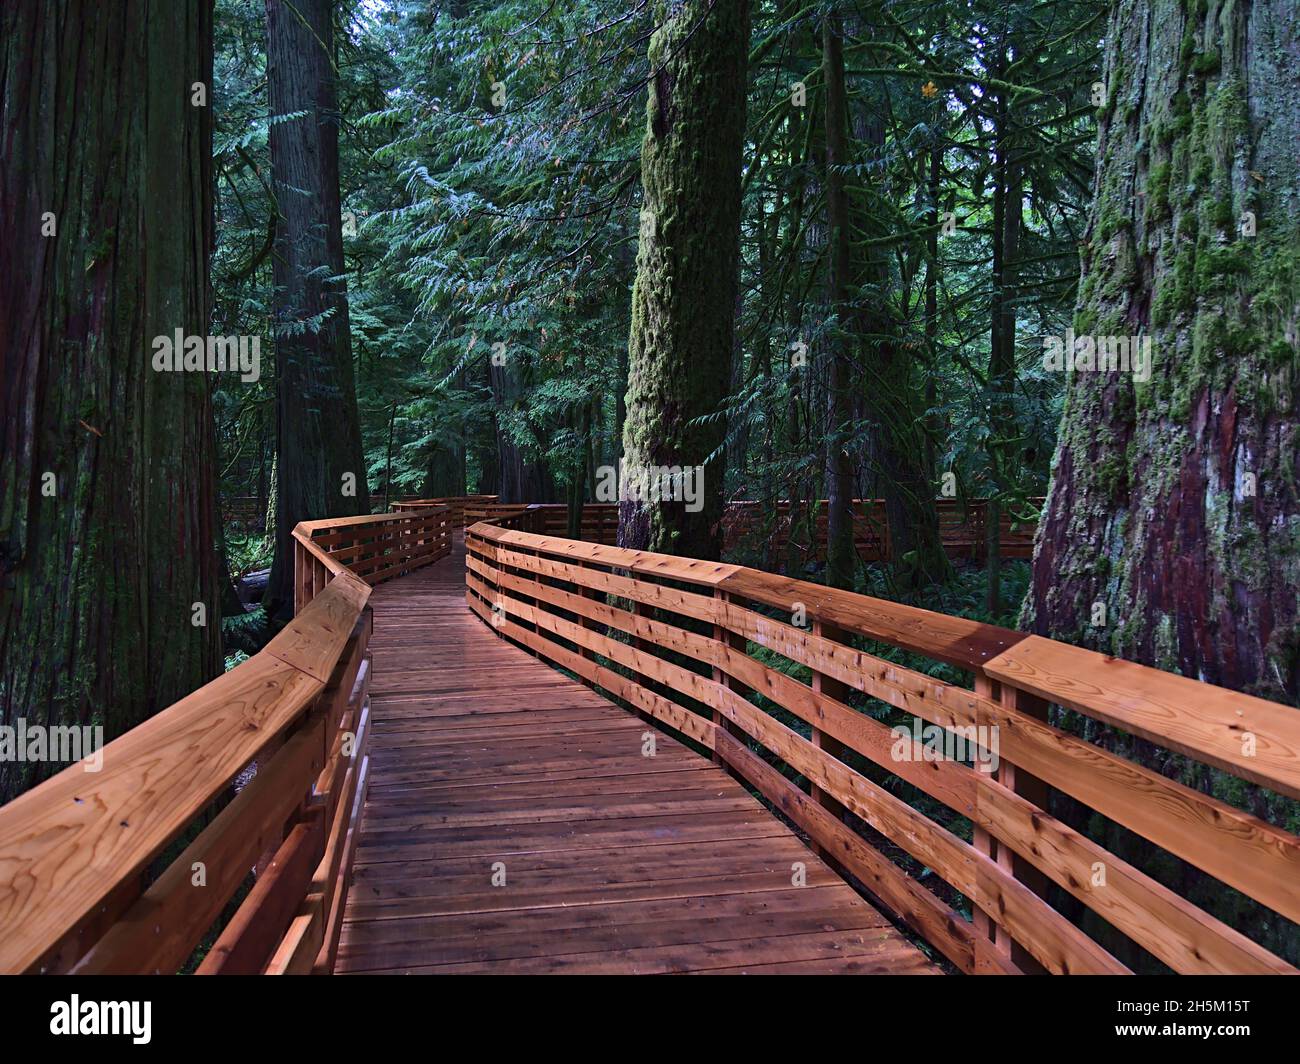 Diminishing perspective of wooden boardwalk leading through old forest with western red cedar trees at Cathedral Grove, Vancouver Island, BC, Canada. Stock Photo